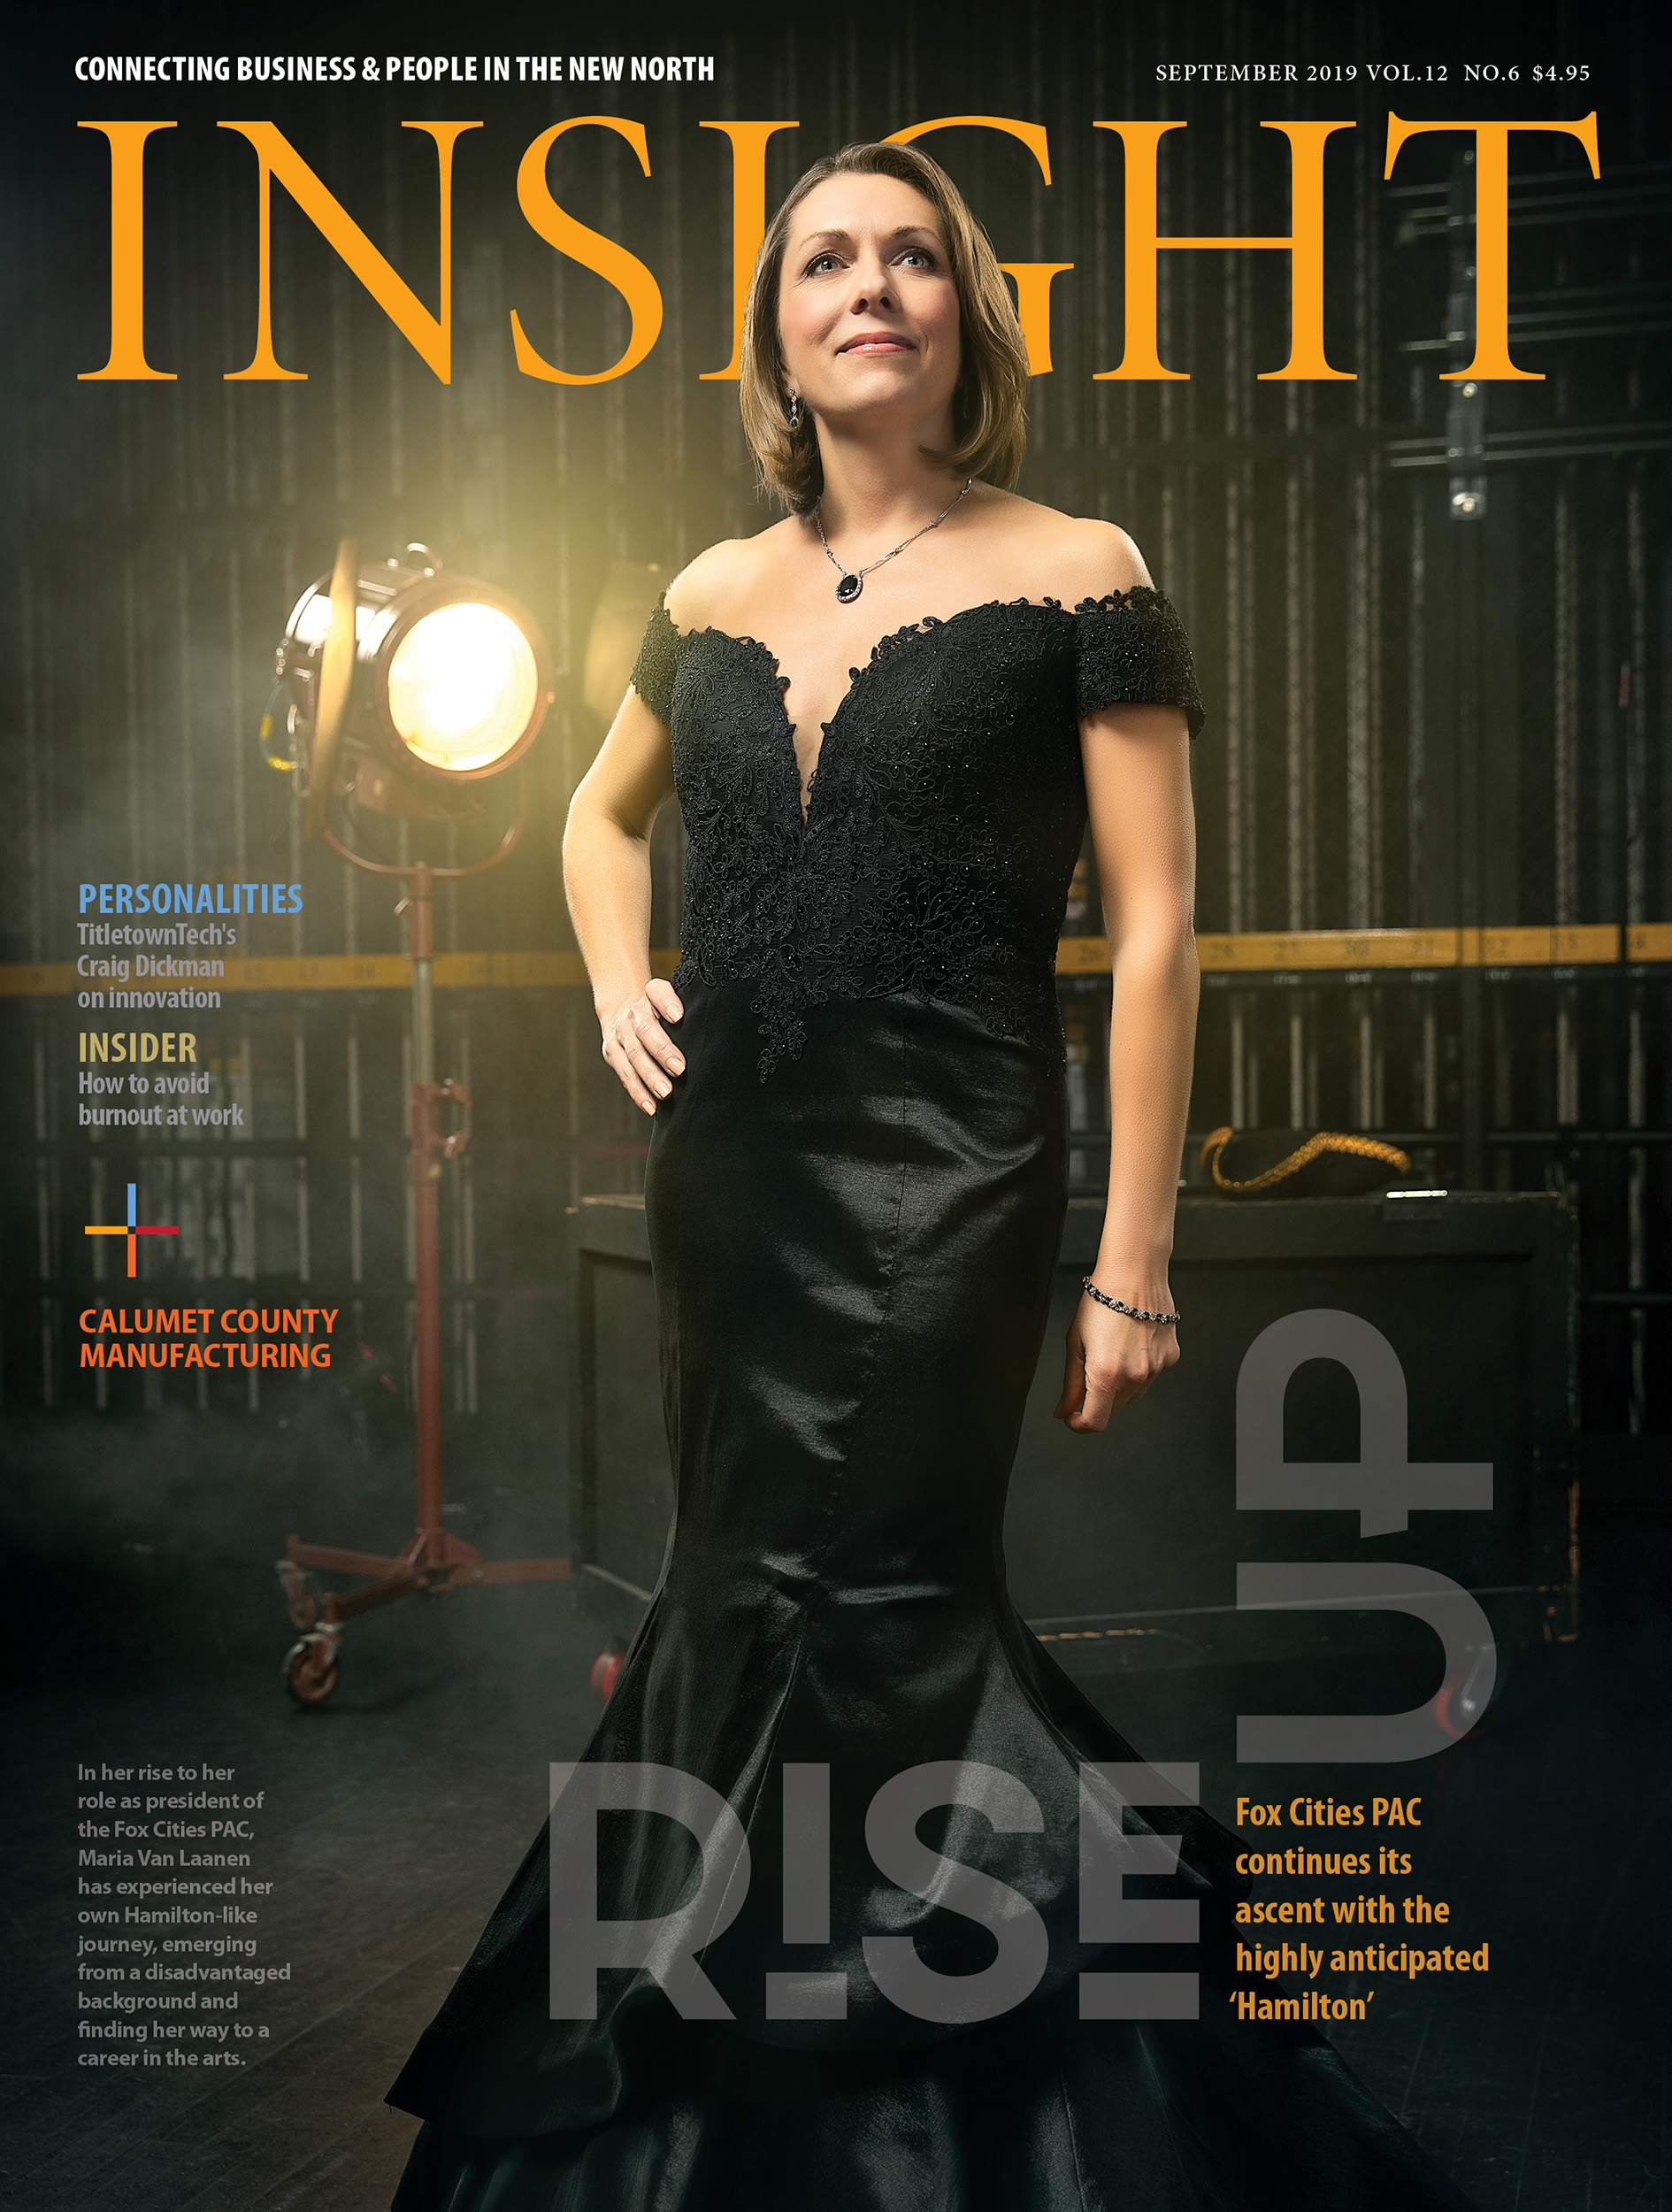 Portrait photography of Maria Van Laanen of the PAC for an Insight magazine cover